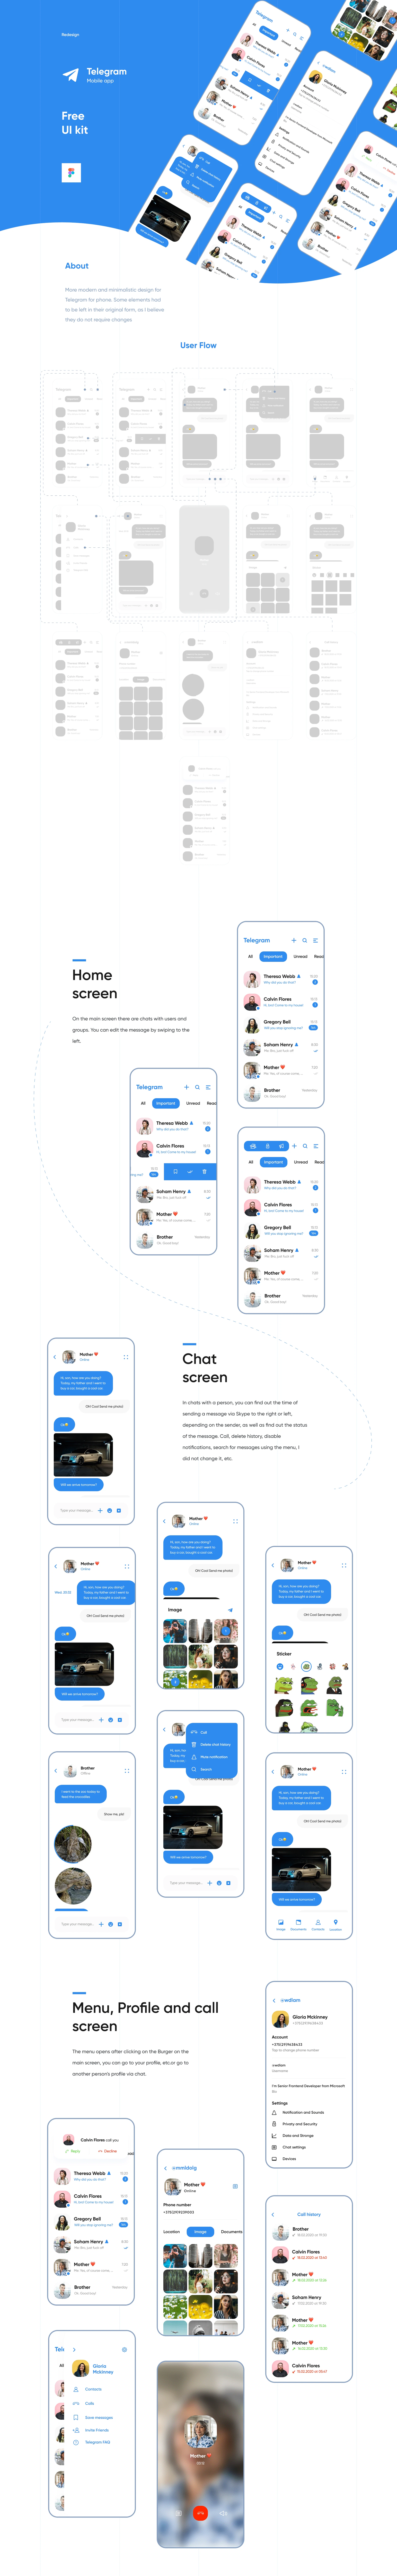 Telegram App UI Kit for Figma - Minimal and clean app design, 13 screens for you to get started.